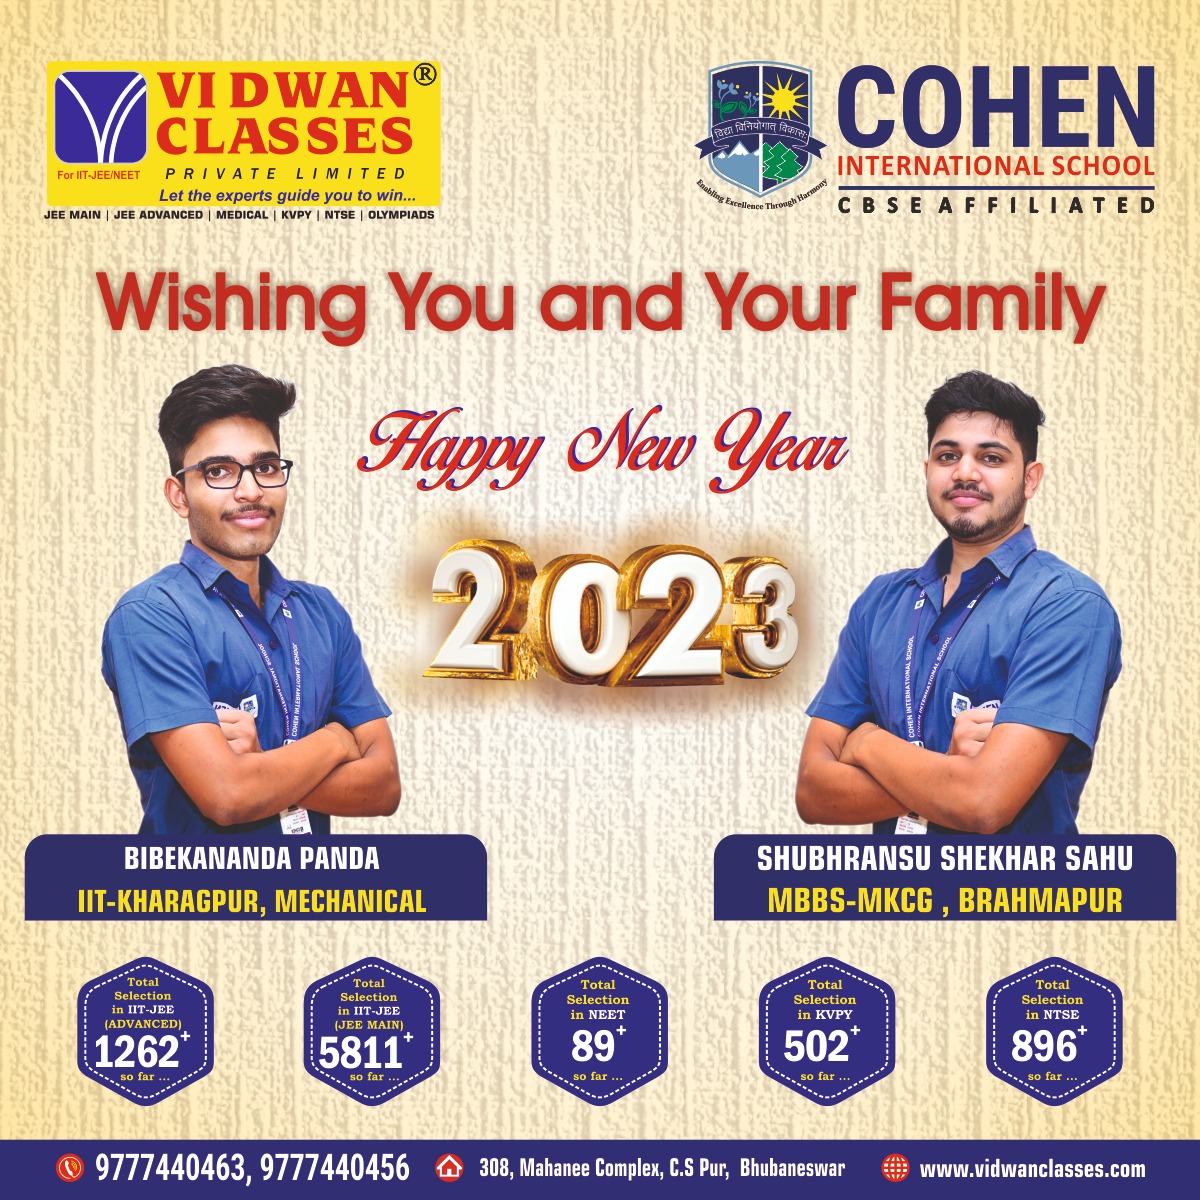 Best wishes to you & family on the New Year. May you be blessed, achieve success & prosperity. Happy New Year.✨

#vidwaanclasses #coheninternationalschool #cohen #neet2022 #neet #neet2022result #dreamcarrer #ntascore #cis #joincohen #boardresult2022 #boardresult #congratulations